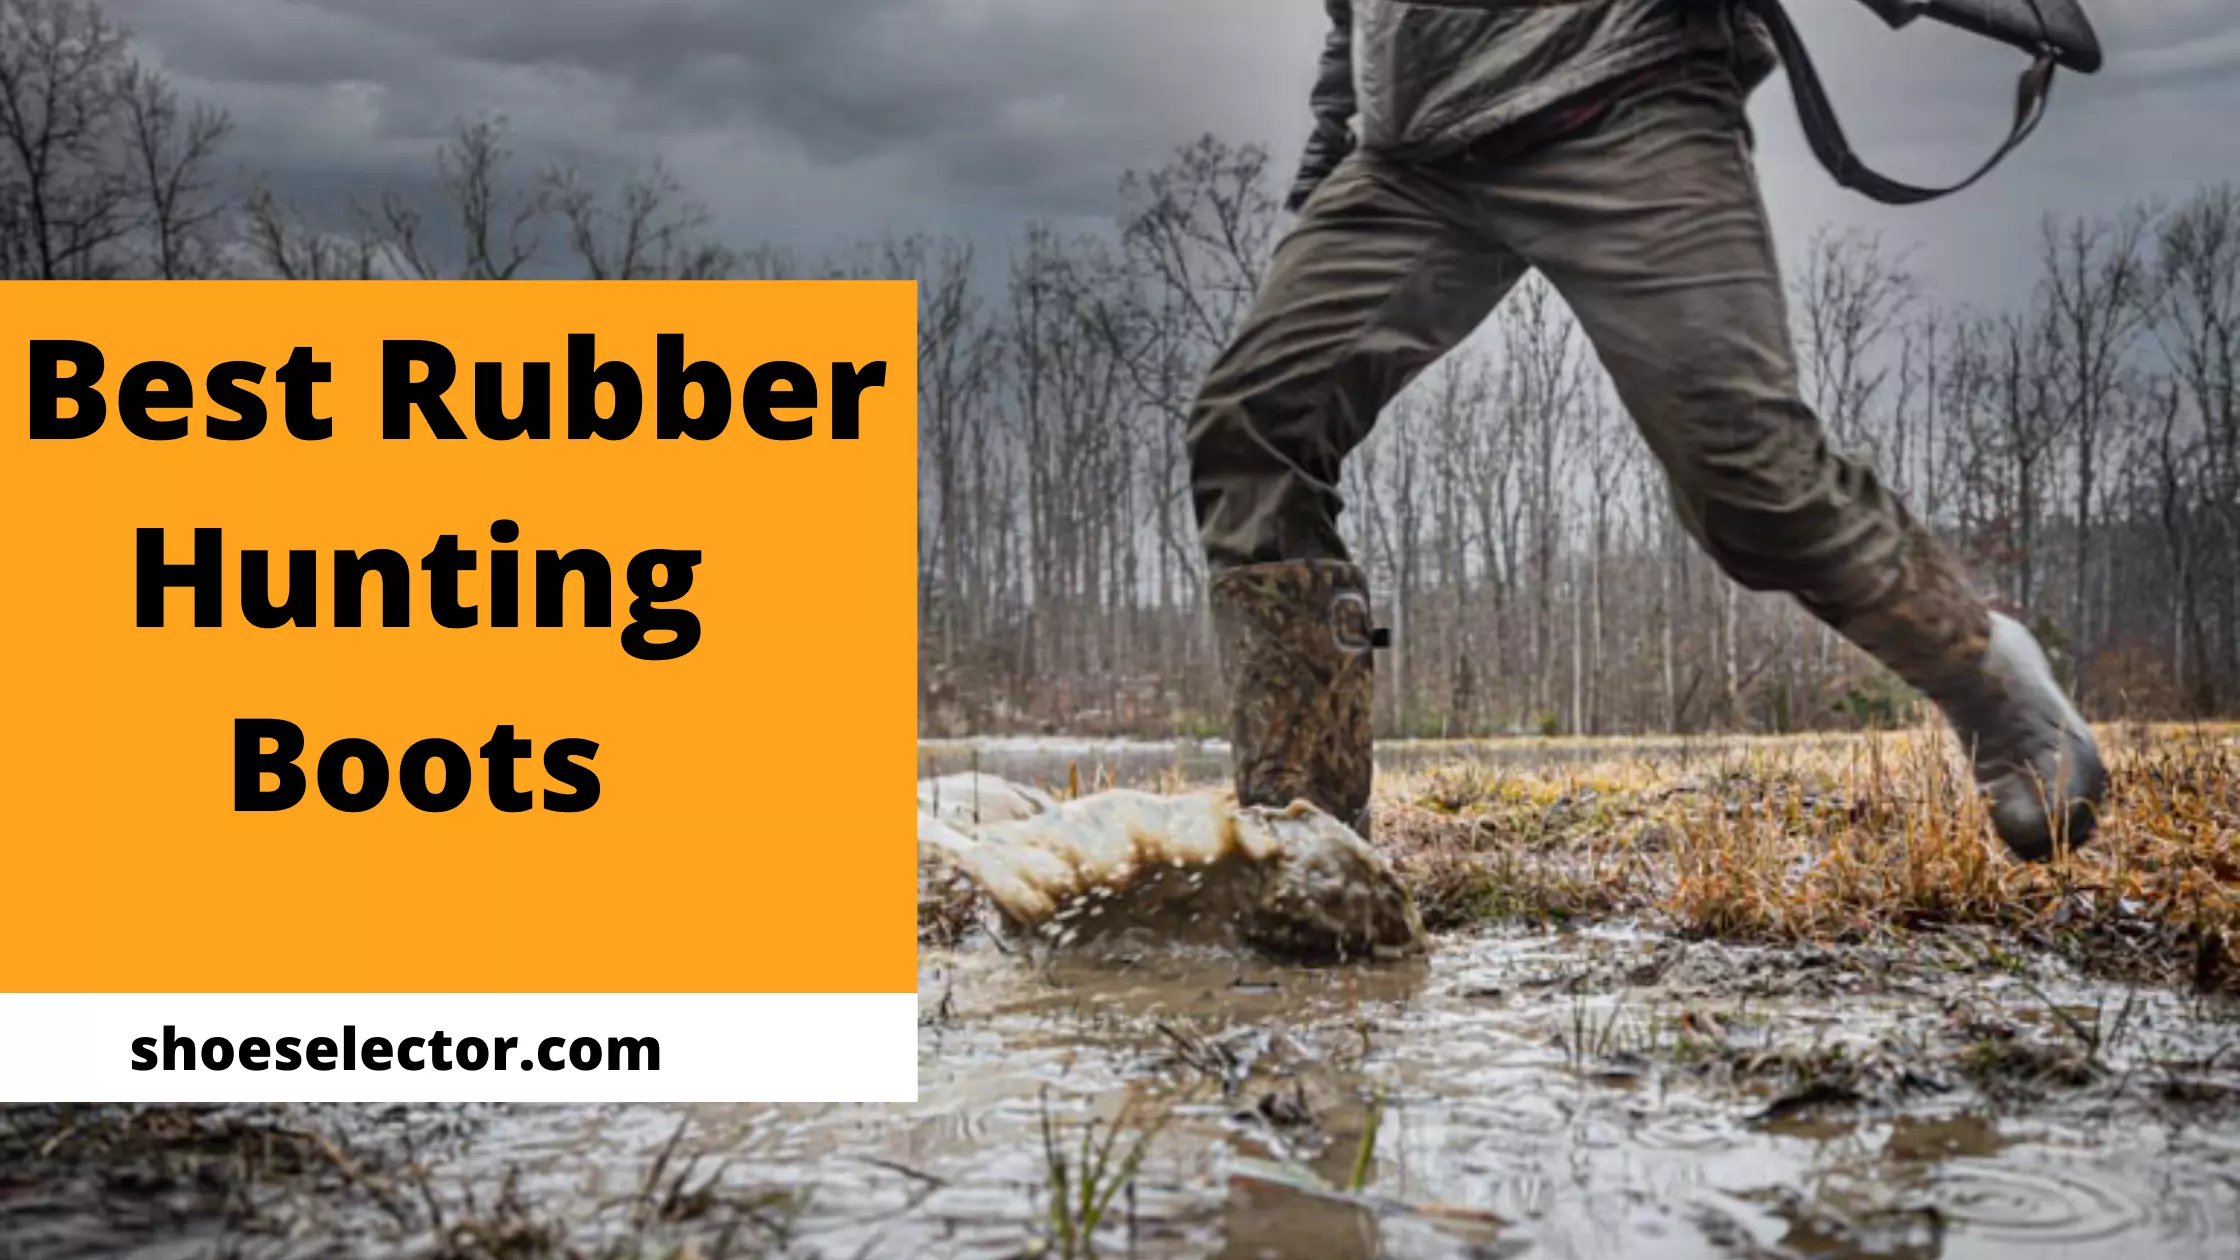  Best Rubber Hunting Boots - Complete Shopping Tips